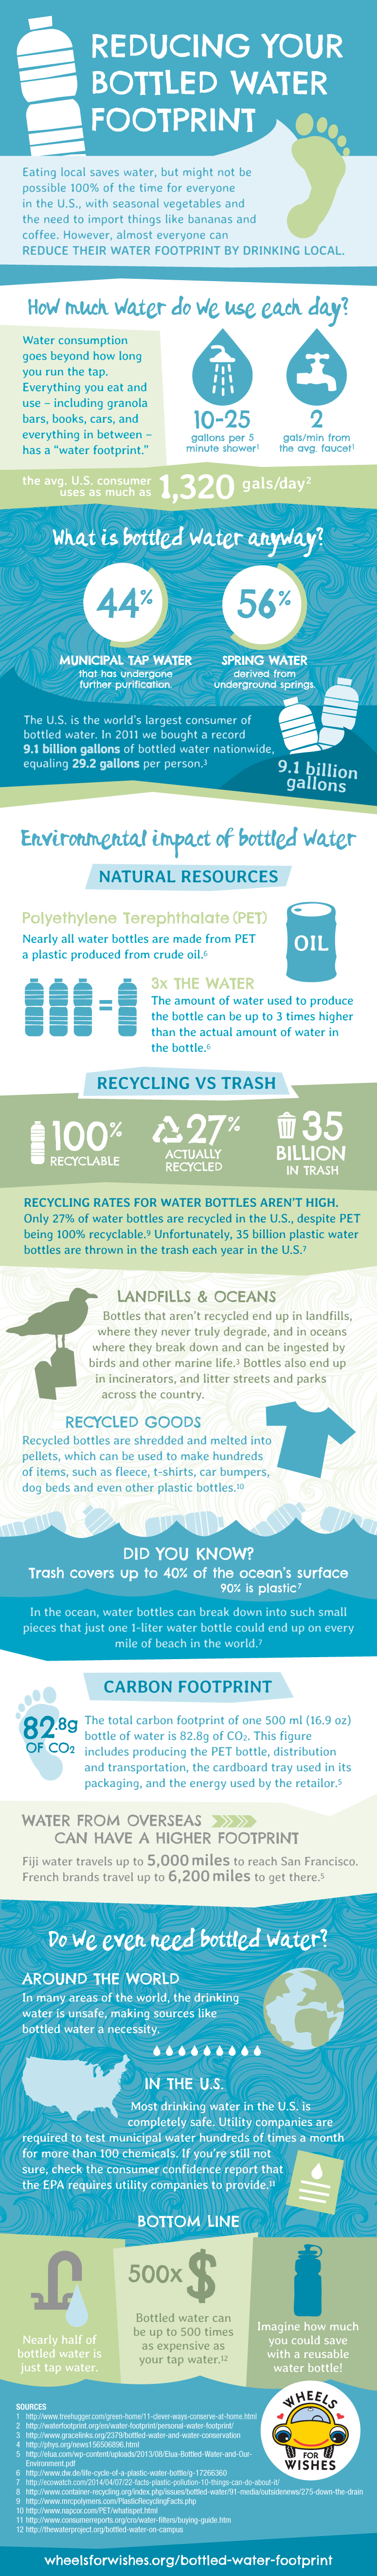 reduce water usage infographic